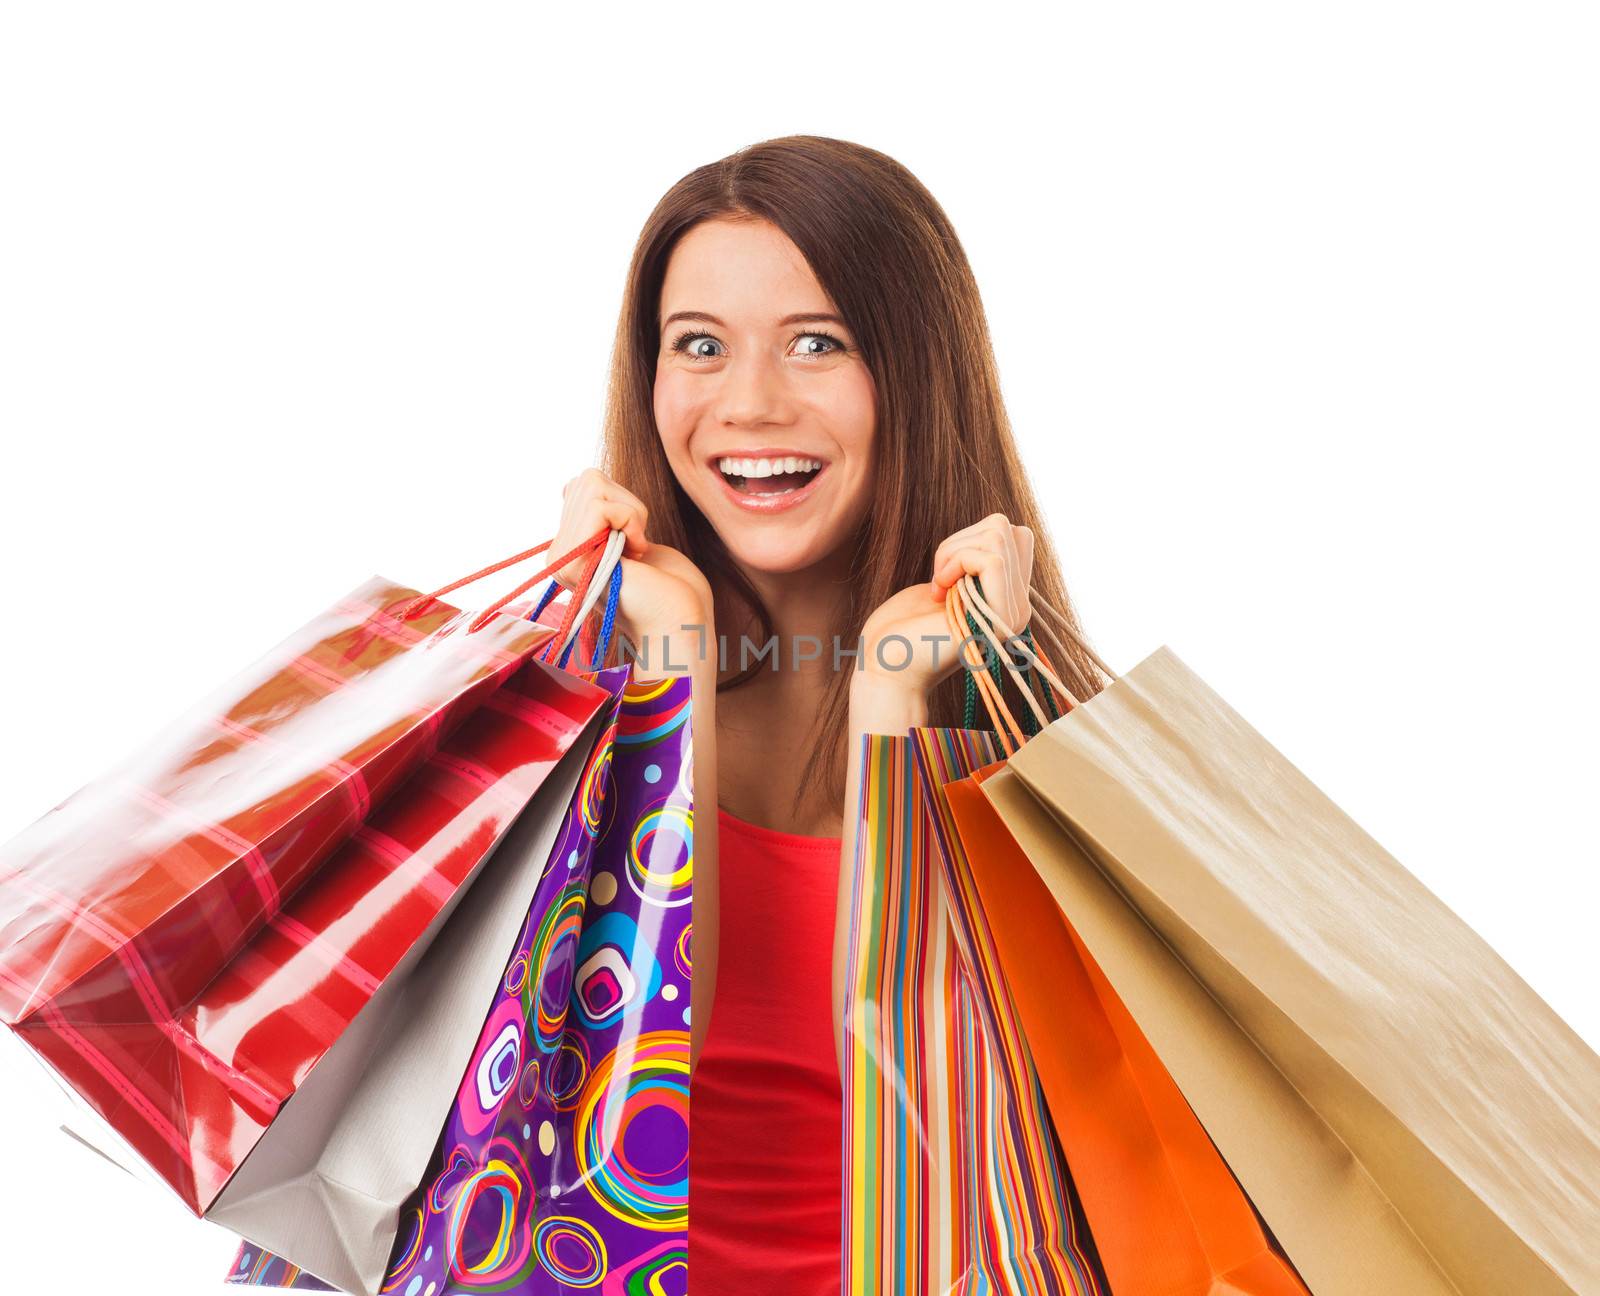 Portrait of a young woman holding shopping bags and looking very happy, isolated on white